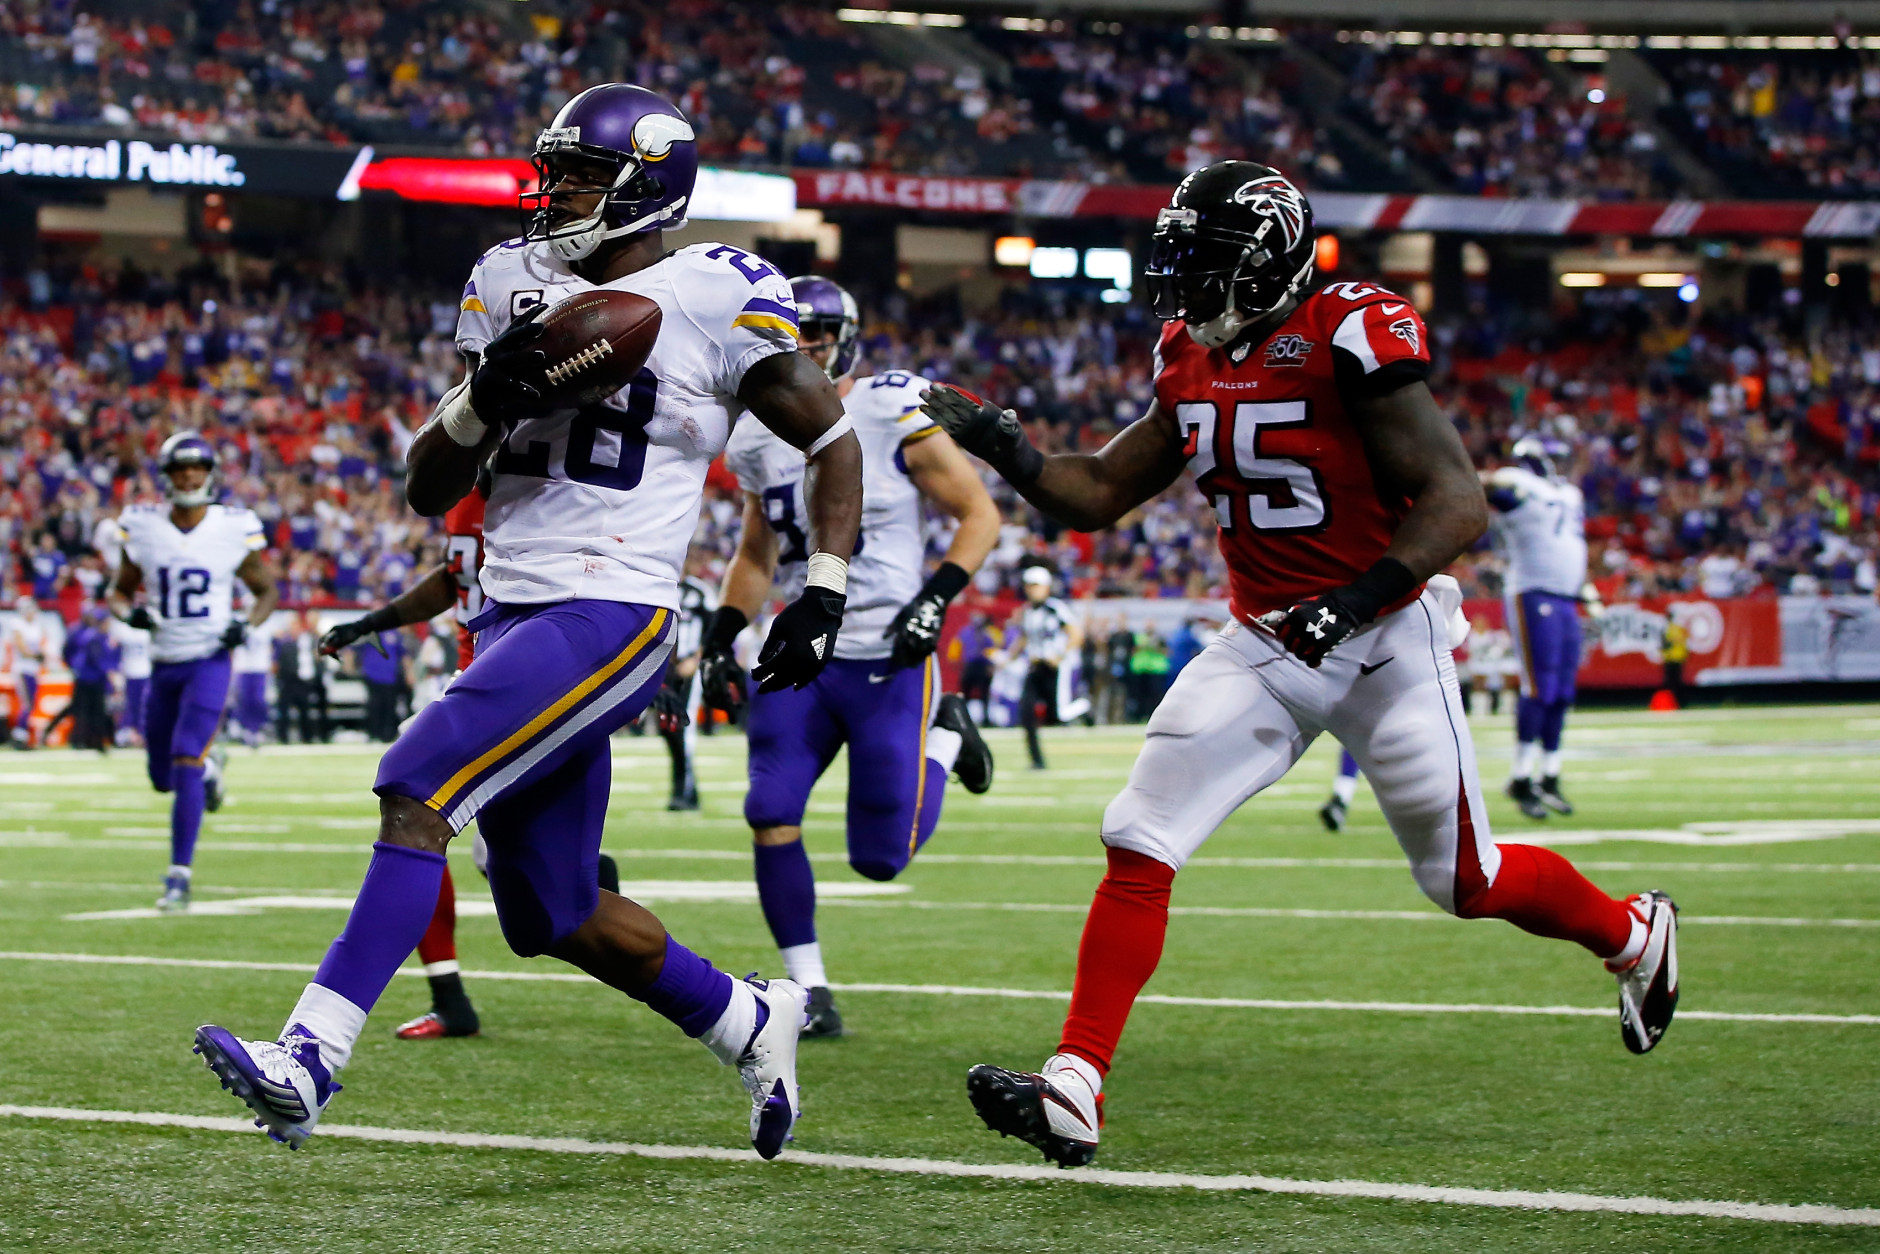 ATLANTA, GA - NOVEMBER 29:  Adrian Peterson #28 of the Minnesota Vikings scores a touchdown during the second half against the Atlanta Falcons at the Georgia Dome on November 29, 2015 in Atlanta, Georgia.  (Photo by Kevin C. Cox/Getty Images)